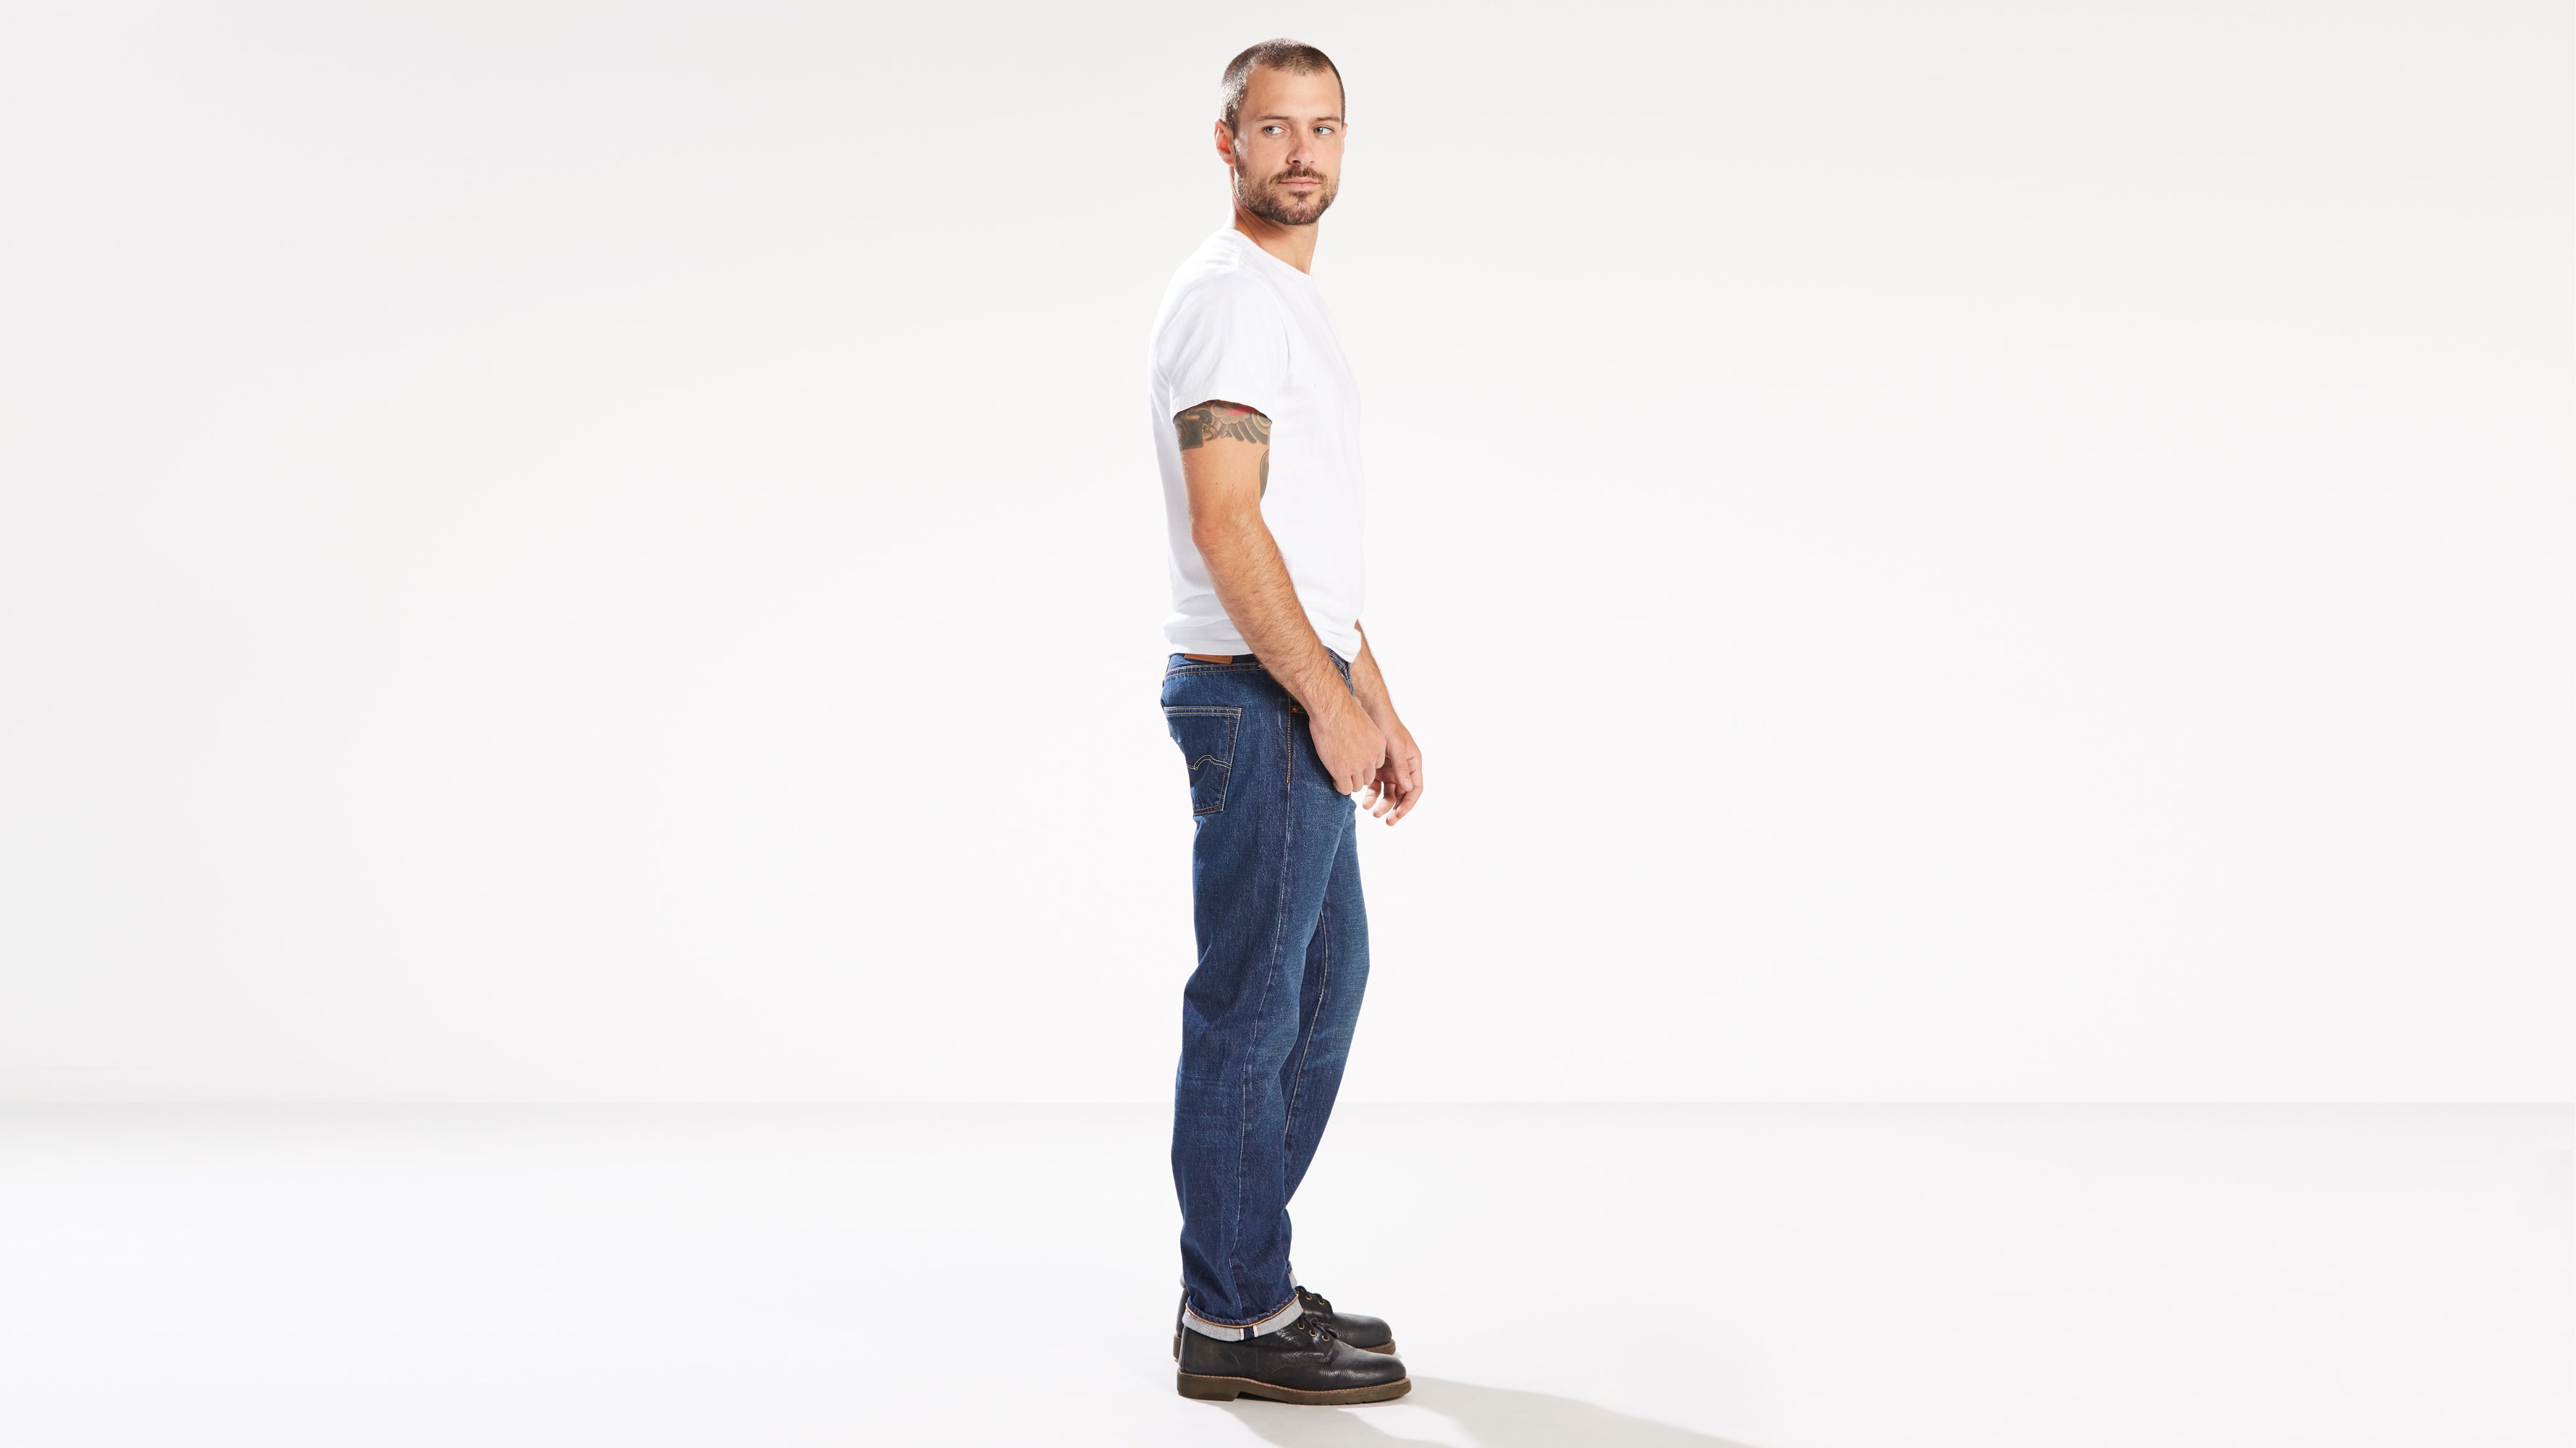 levi's men's made in the usa 501 original fit jean